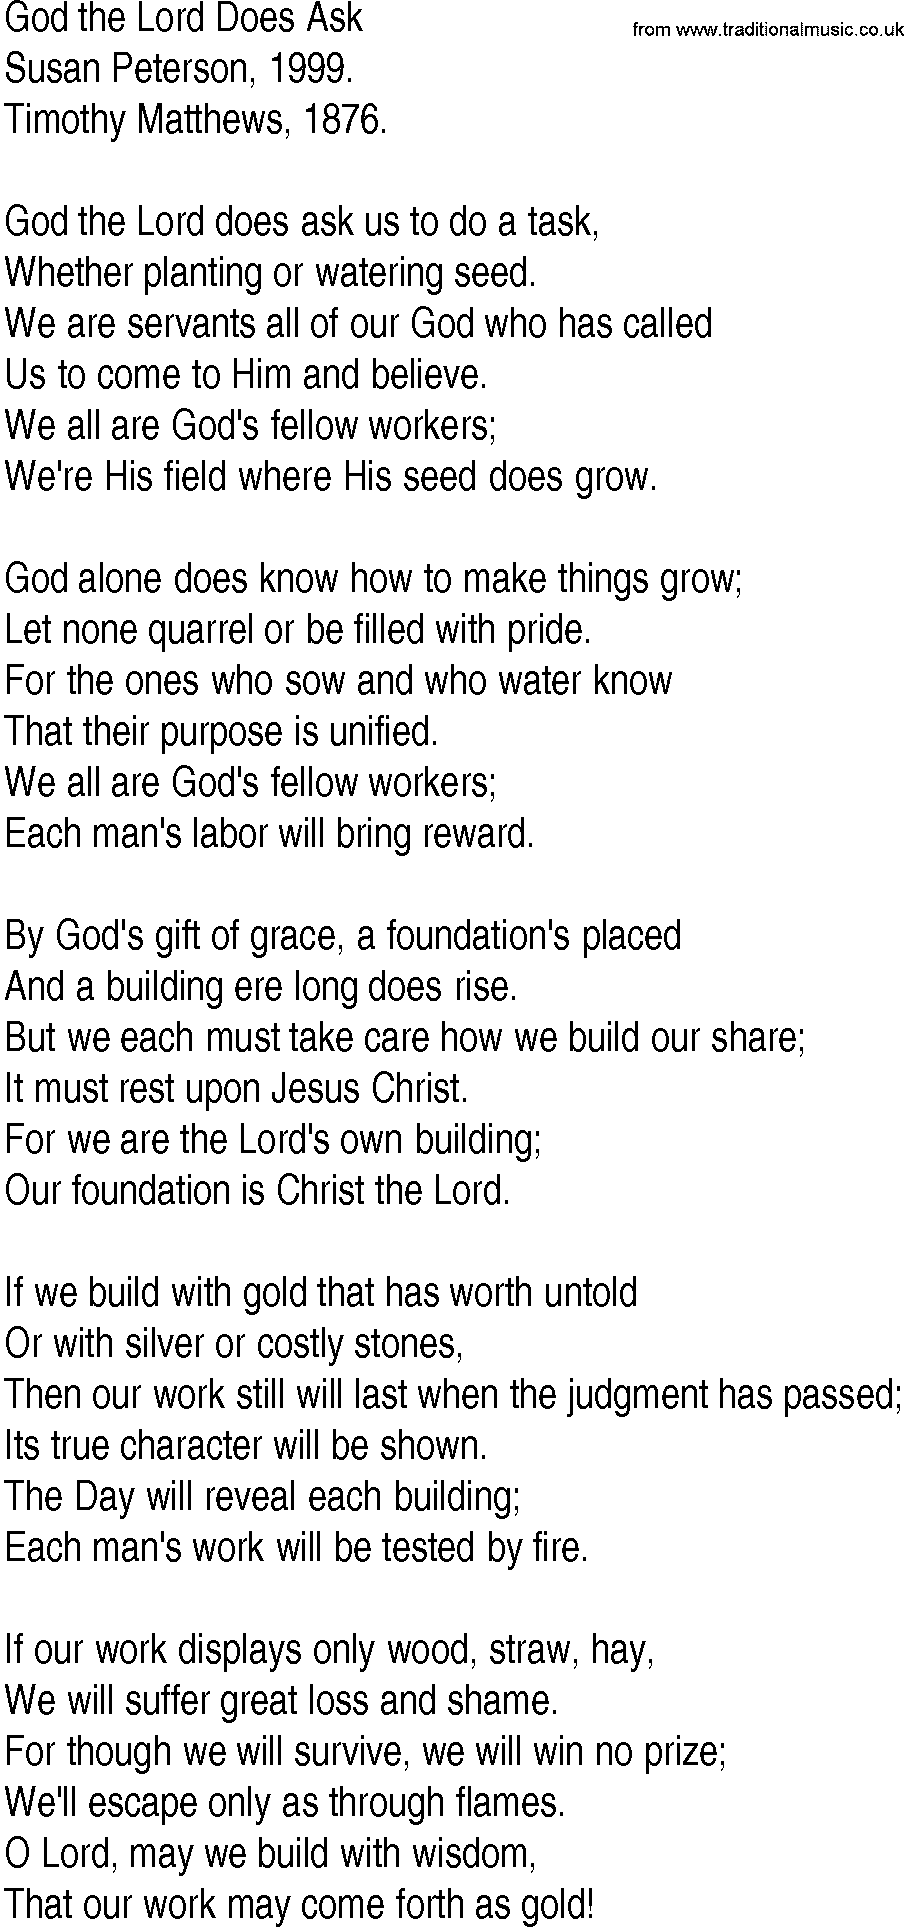 Hymn and Gospel Song: God the Lord Does Ask by Susan Peterson lyrics